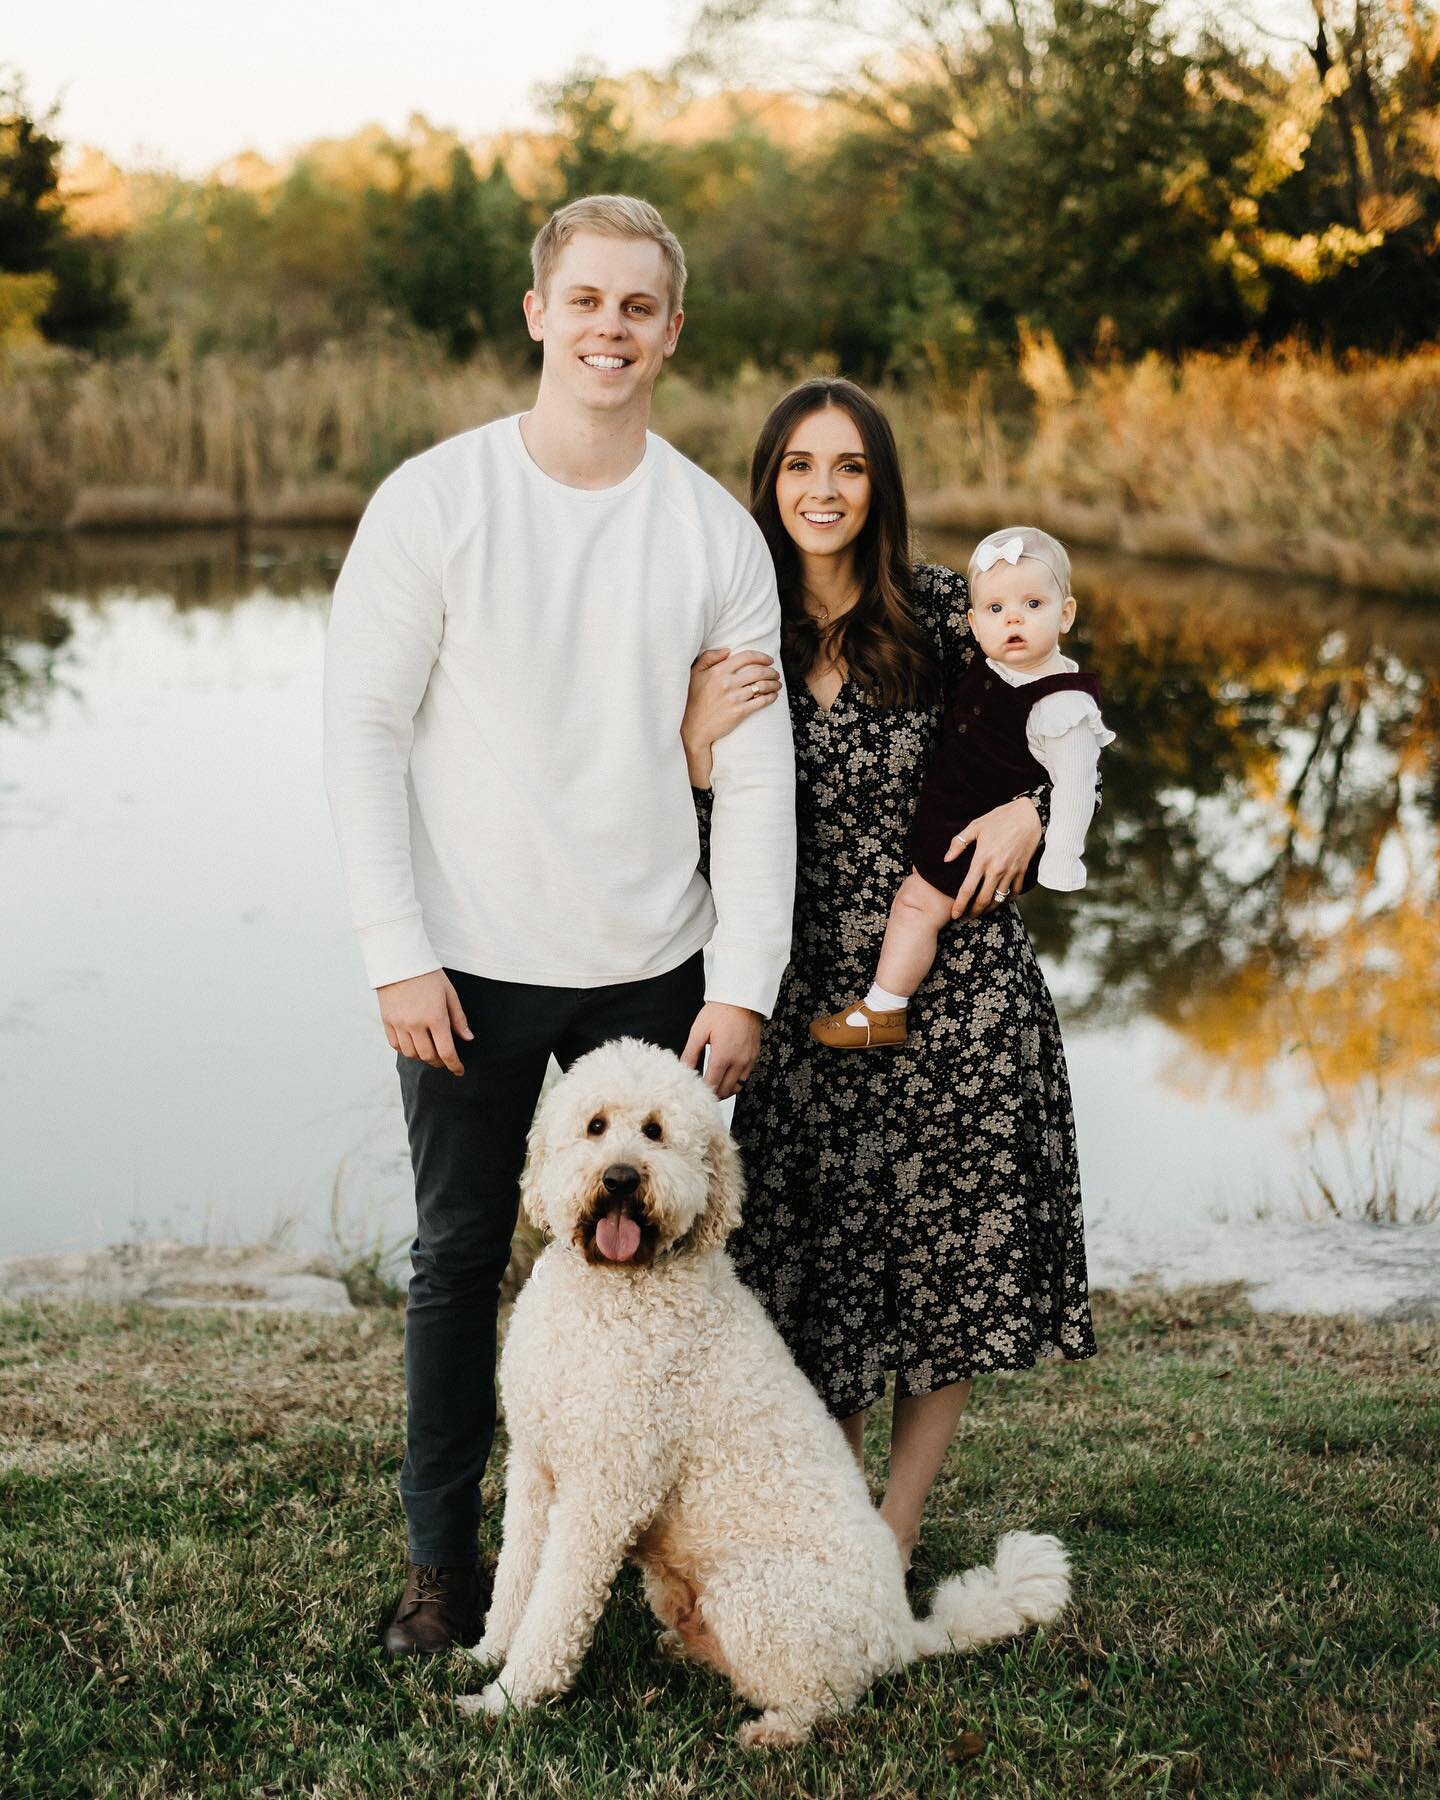 Going through old albums wondering why we never posted this cute family!?It&rsquo;s not even summer yet but we are already looking forward to the fall colors! 🍁